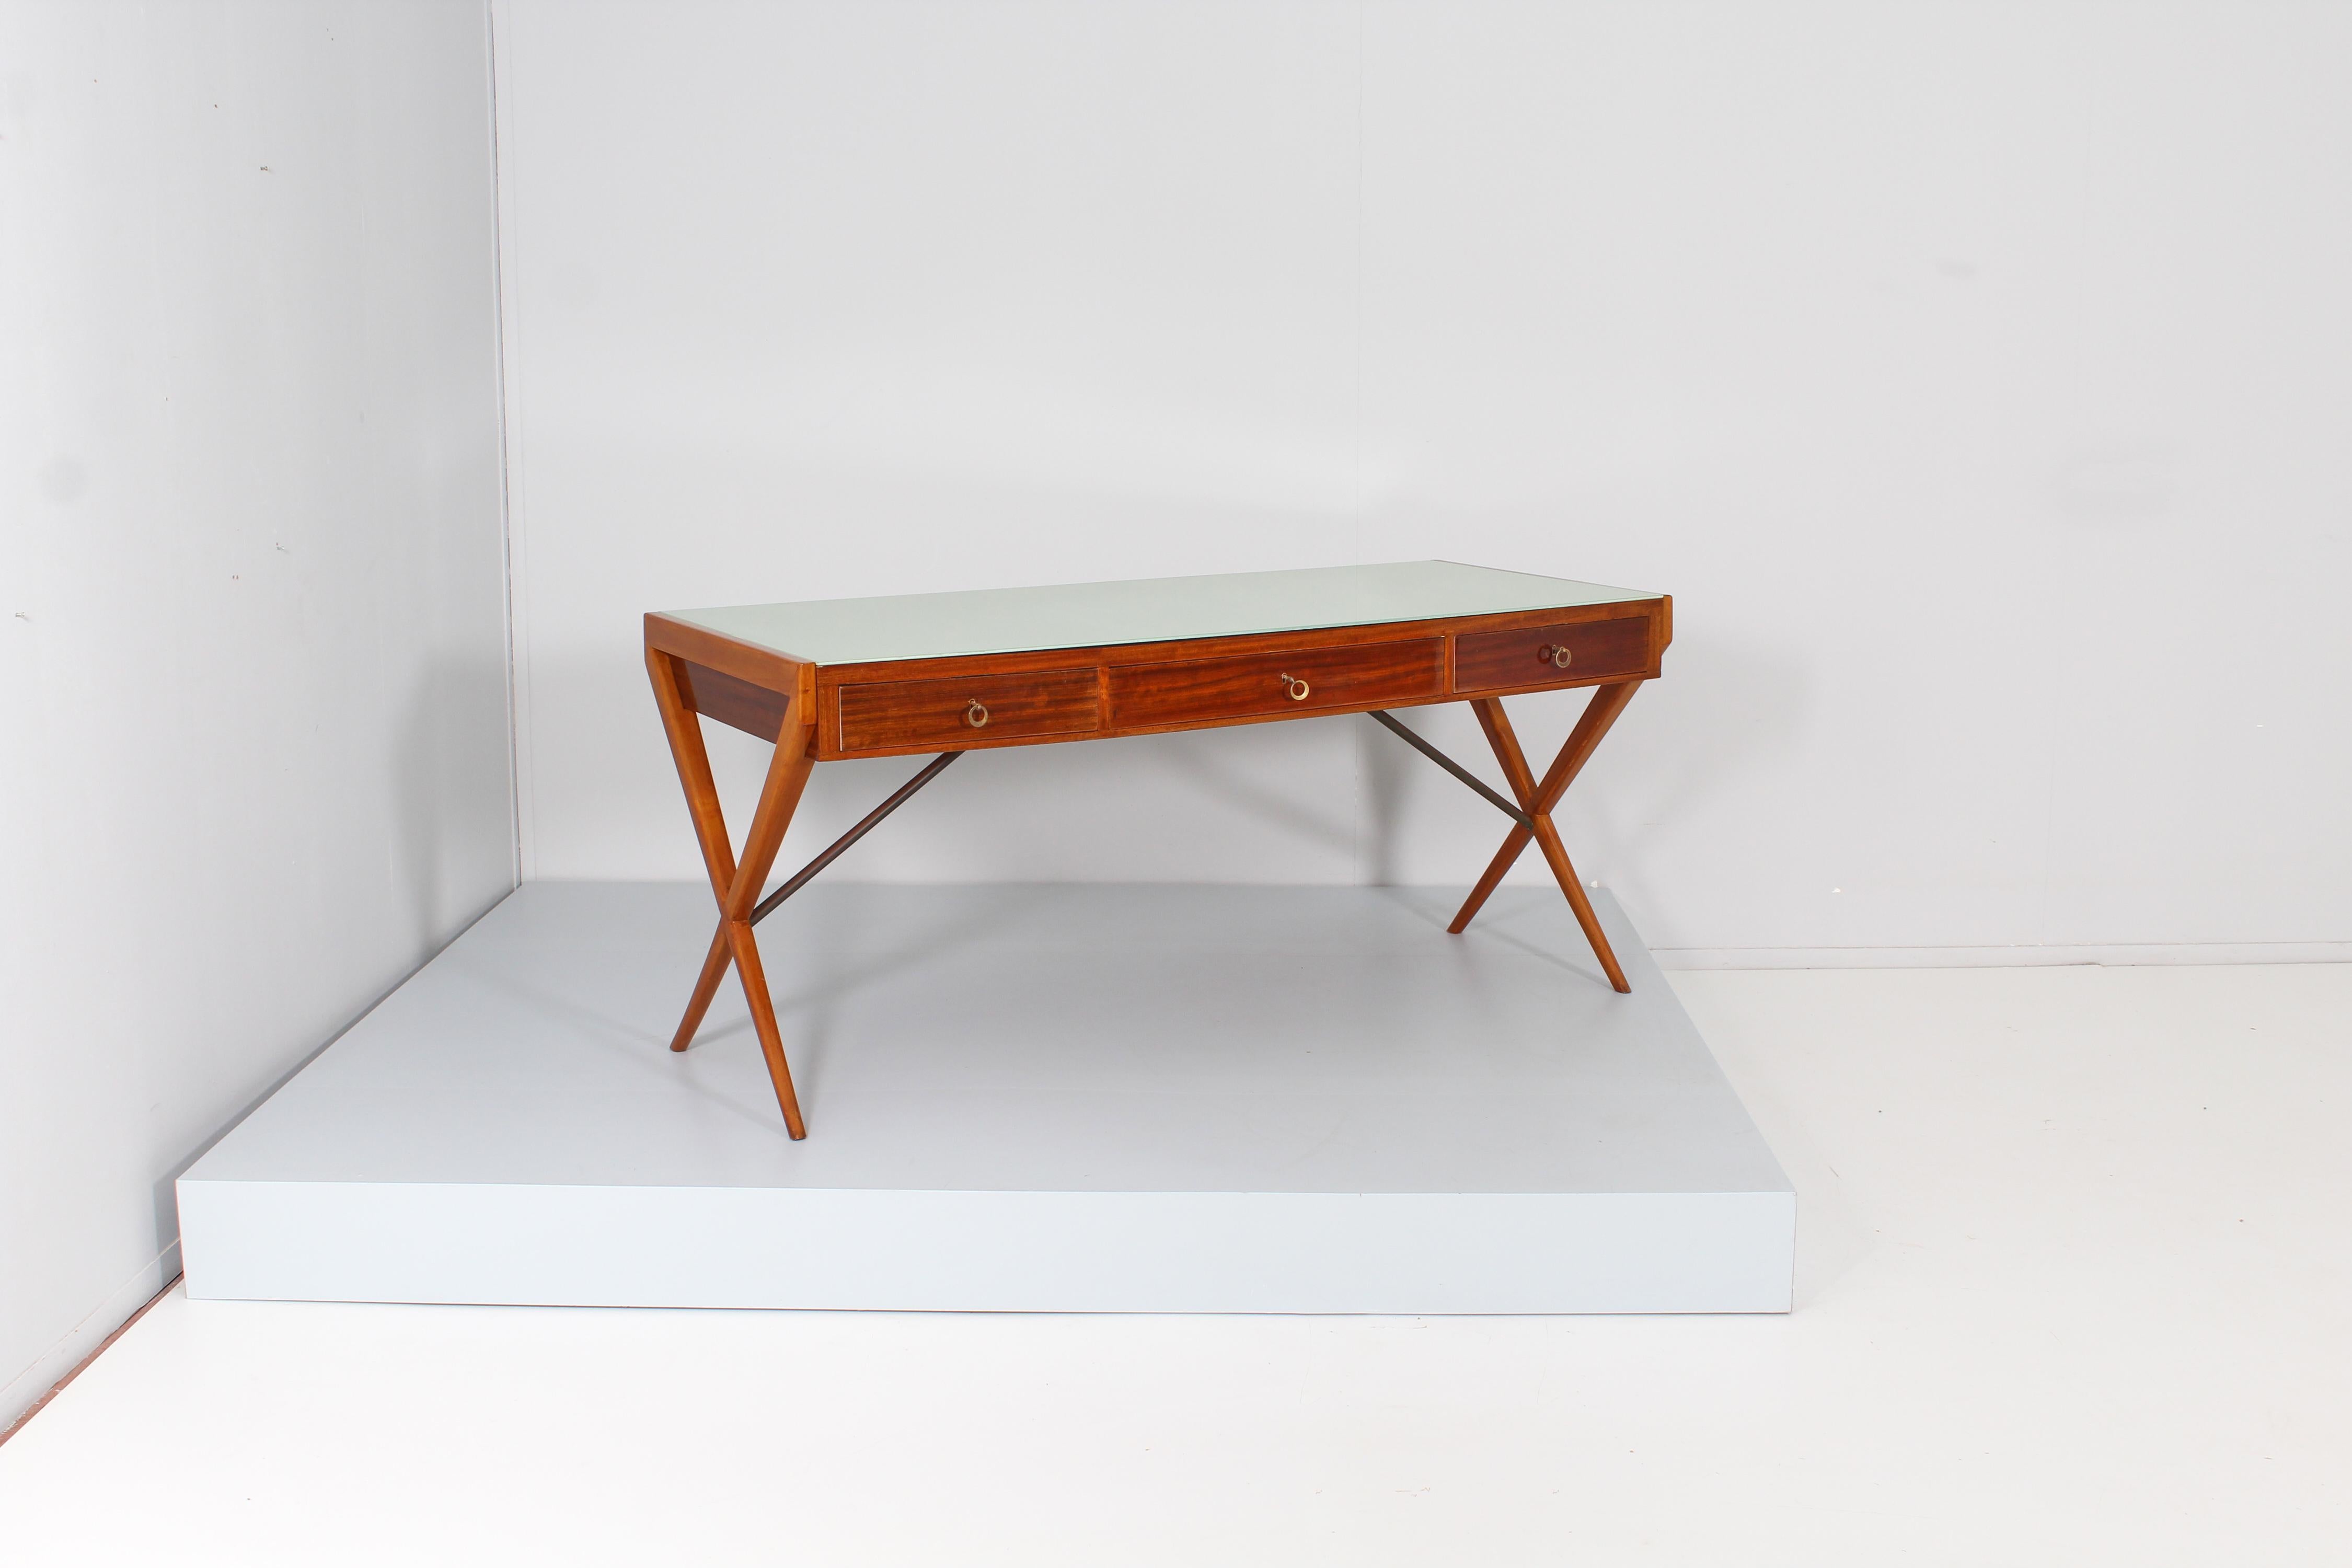 Large and elegant desk in light wood with rectangular glass top in moss green, three front drawers and crossed side legs, with brass support rods.
The captivating geometric design and the quality of the materials make it attributable to Gio' Ponti,